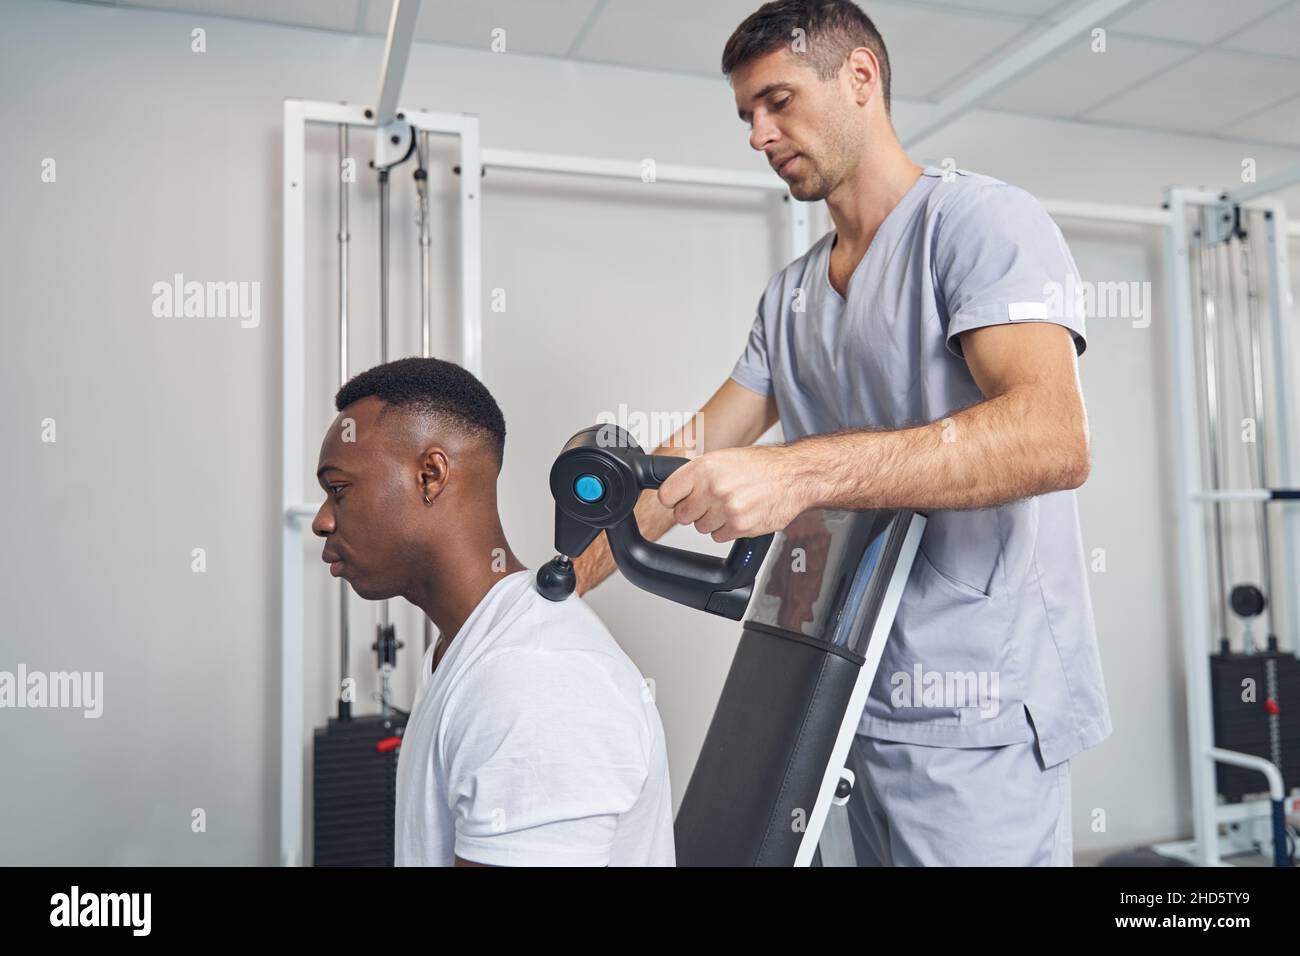 Concentrated physical therapist performing percussive therapy session Stock Photo